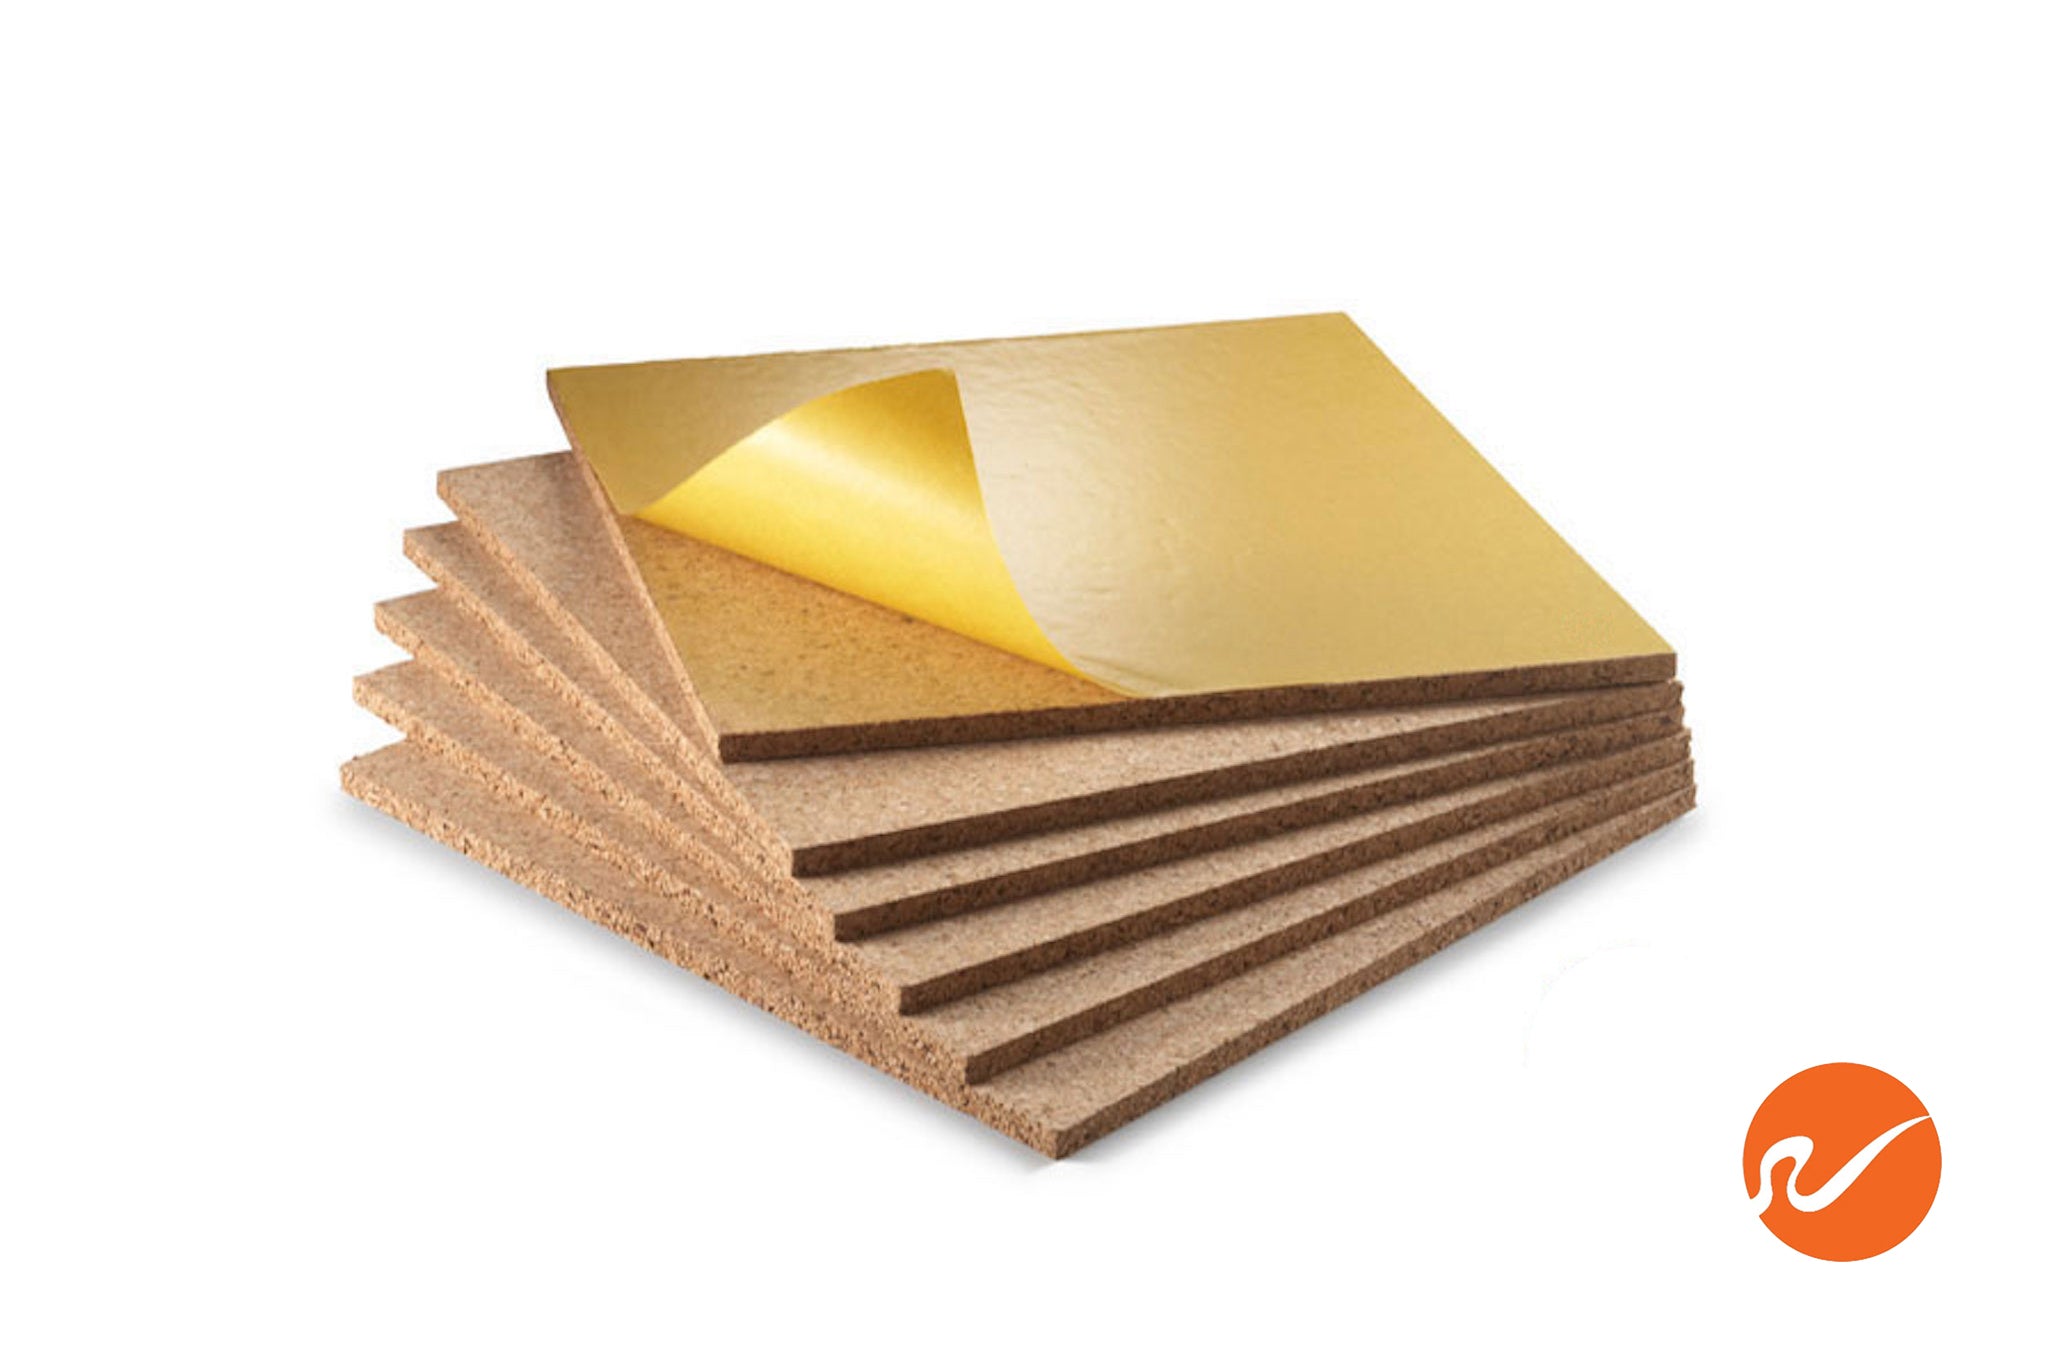 Lwr Crafts Adhesive Back Cork Sheet 6 x 6 Pack of 12